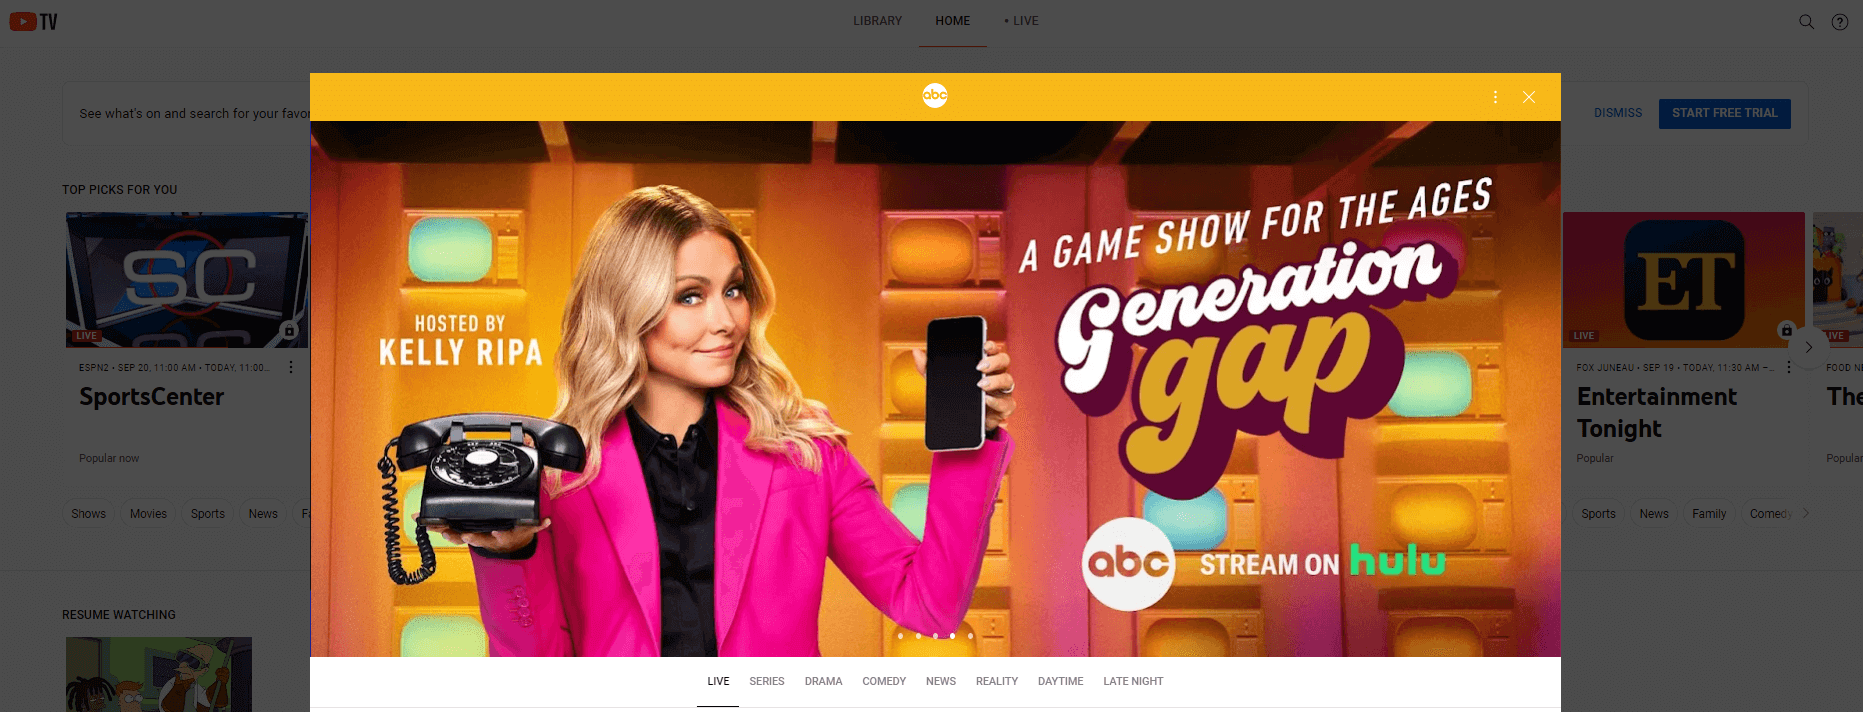  abc-gratis-proefperiode-op-youtube-tv 